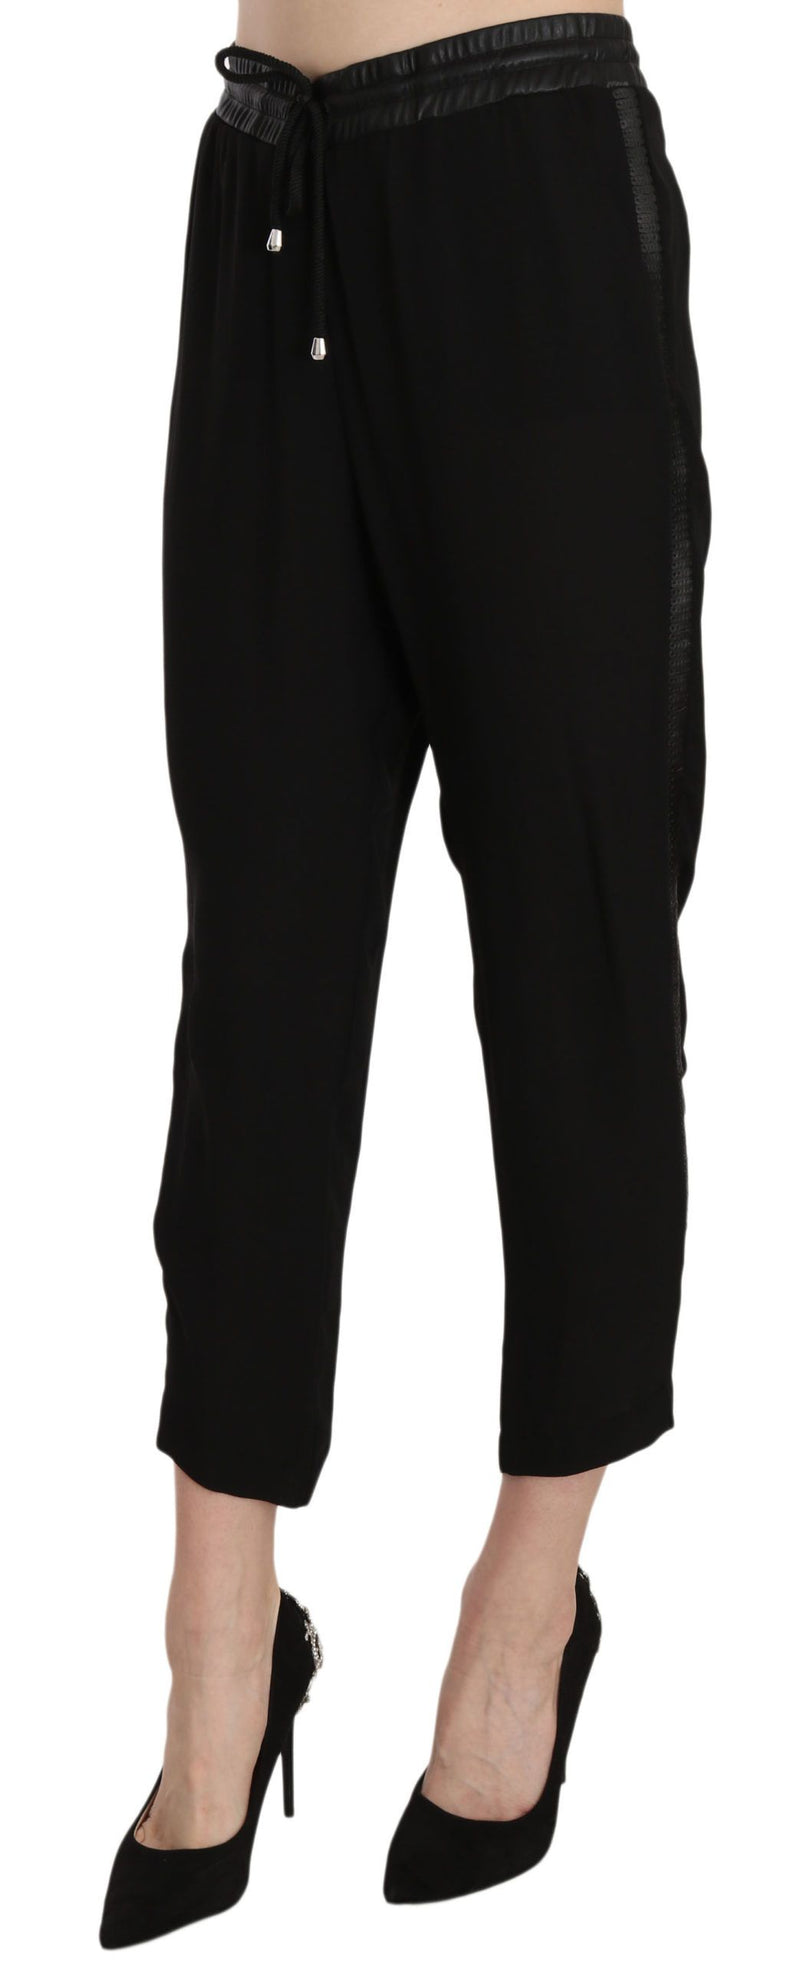 Guess Chic High Waist Cropped Pants in Elegant Women's Black